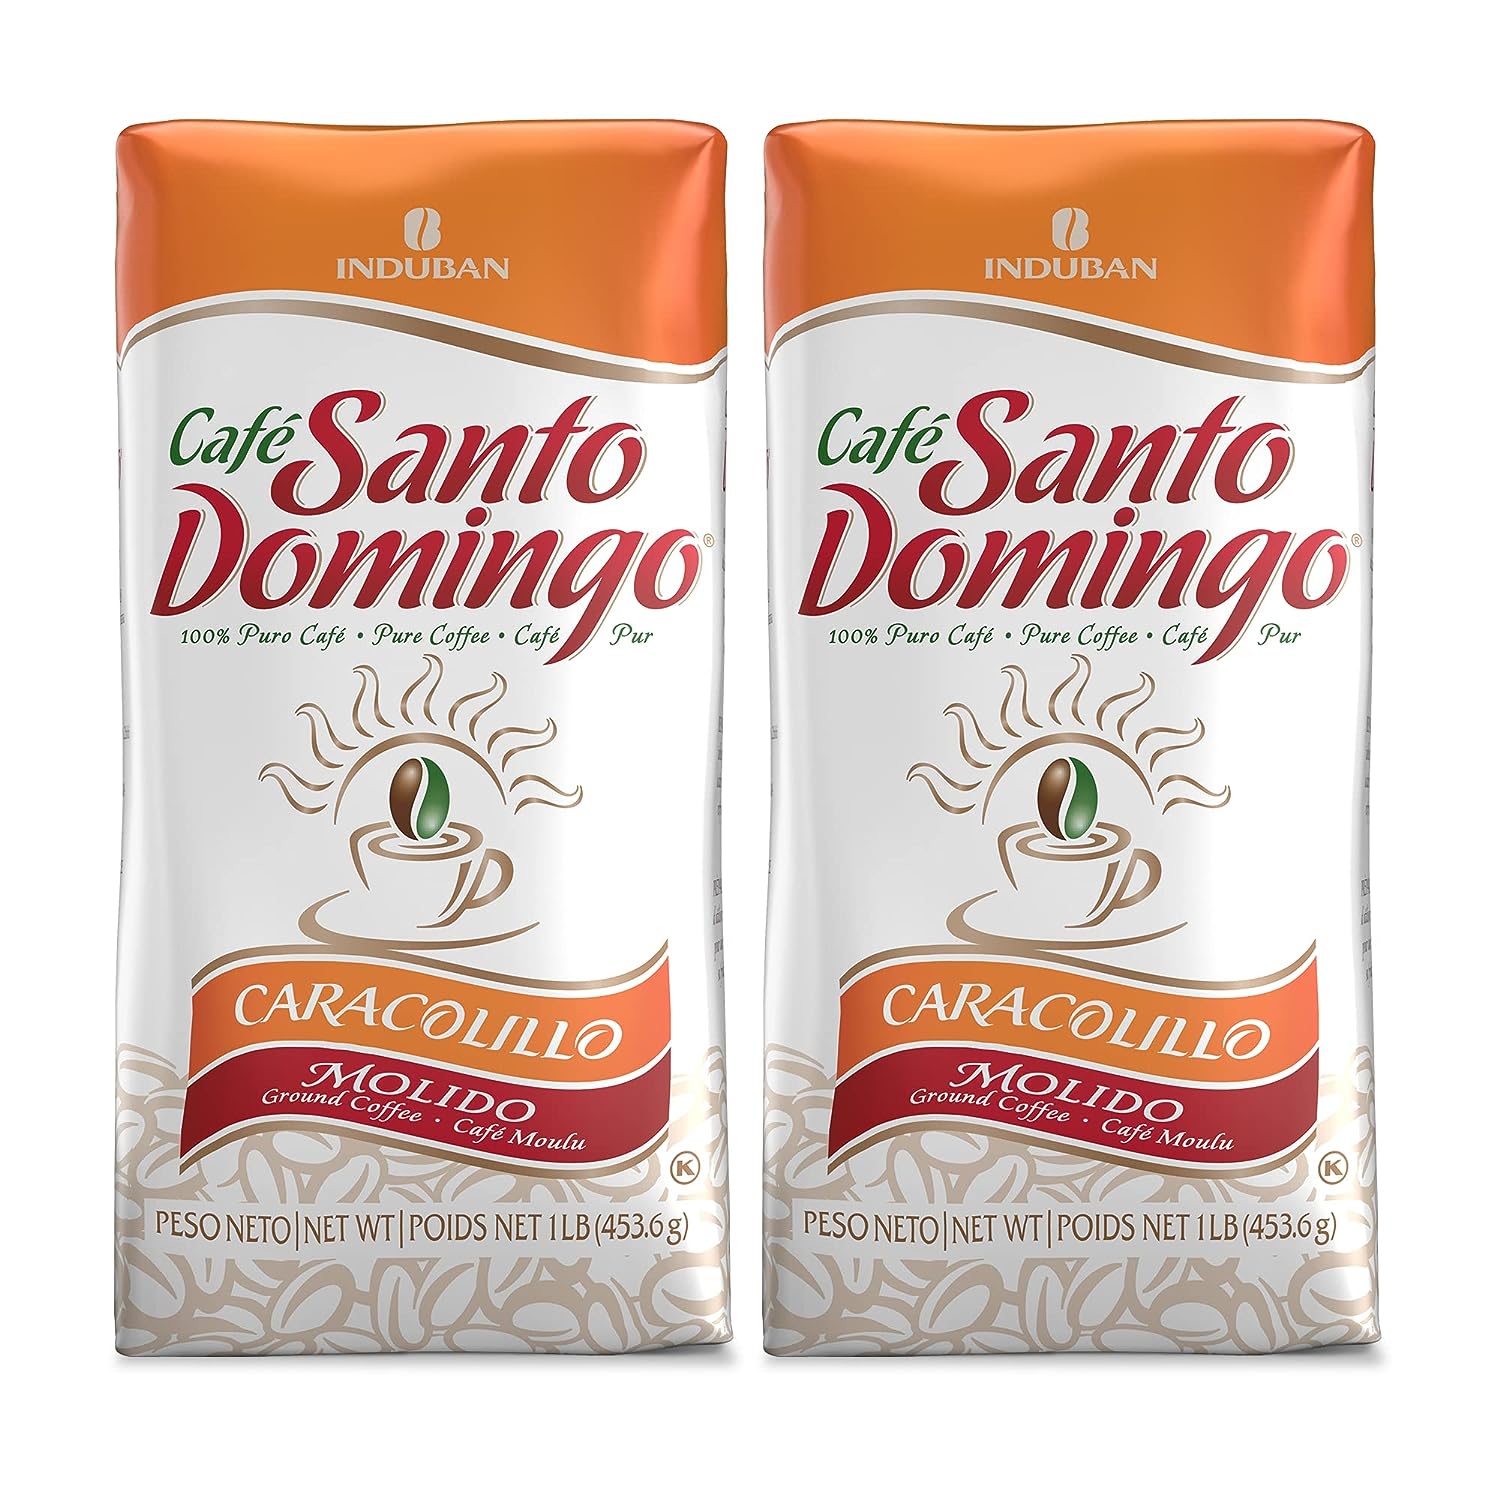 Café Santo Domingo Caracolillo, Bag, Ground Peaberry Coffee, Medium Roast - Product from the Dominican Republic (Pack of 2)